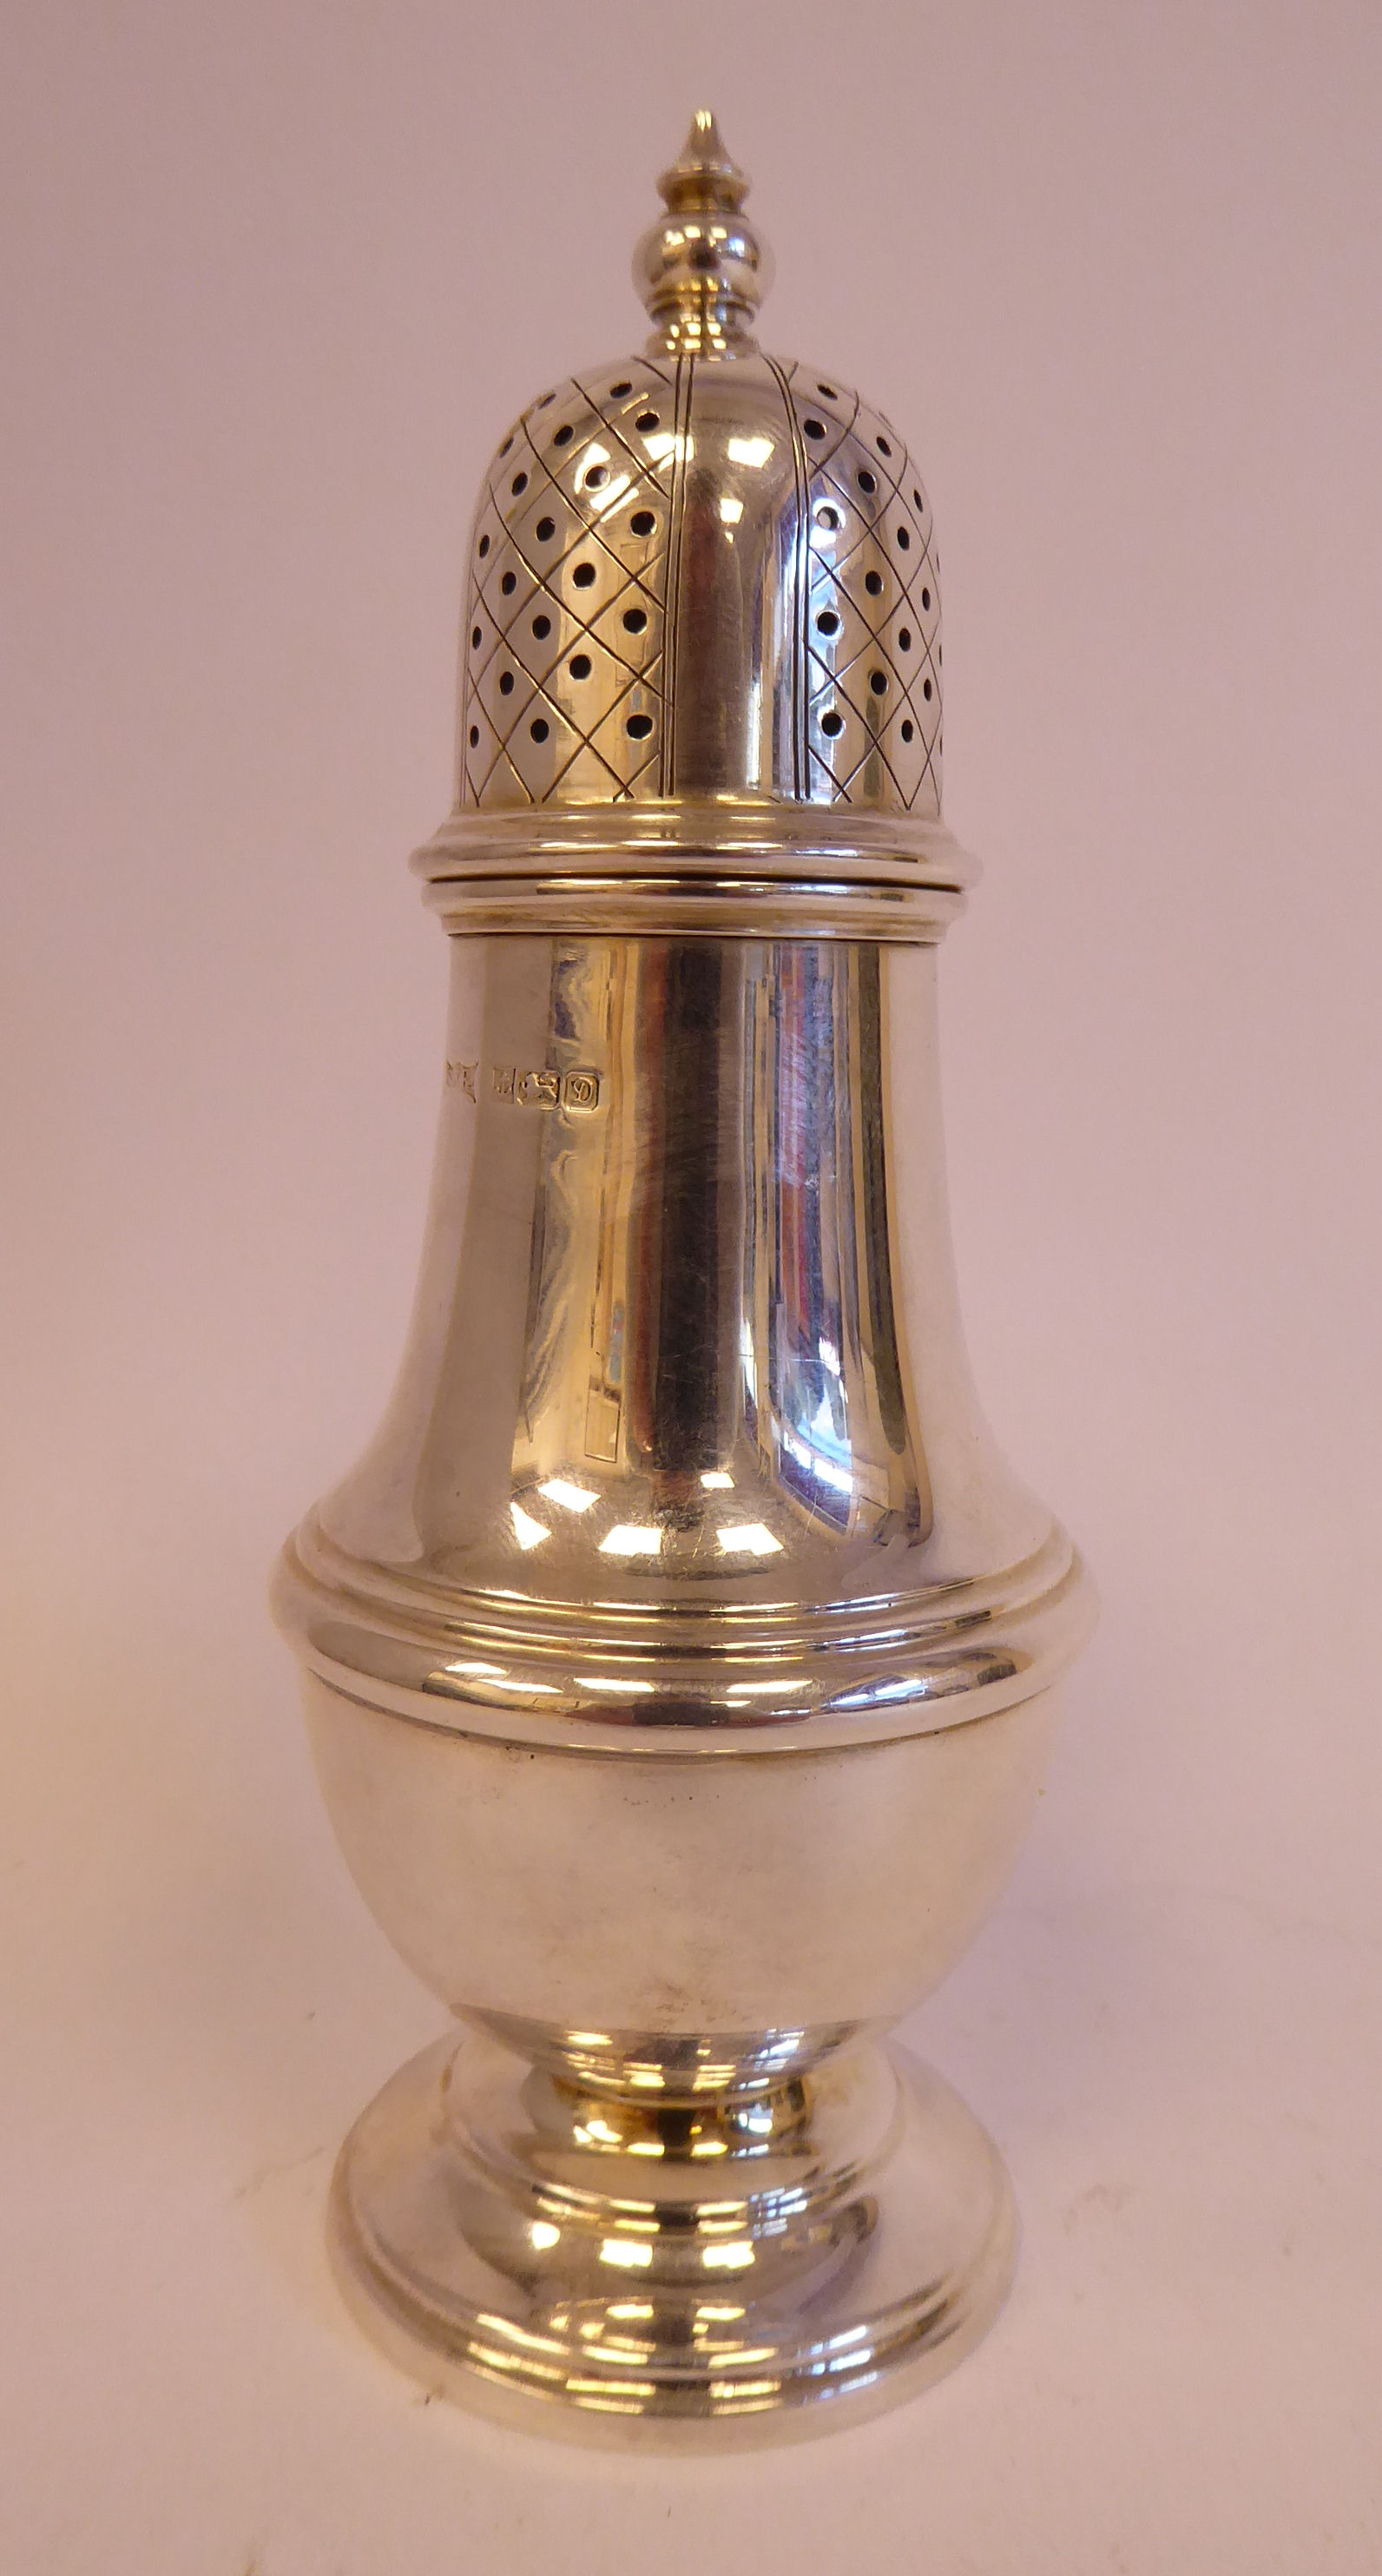 A Georgian style silver caster of pedestal vase design with a domed, - Image 2 of 4